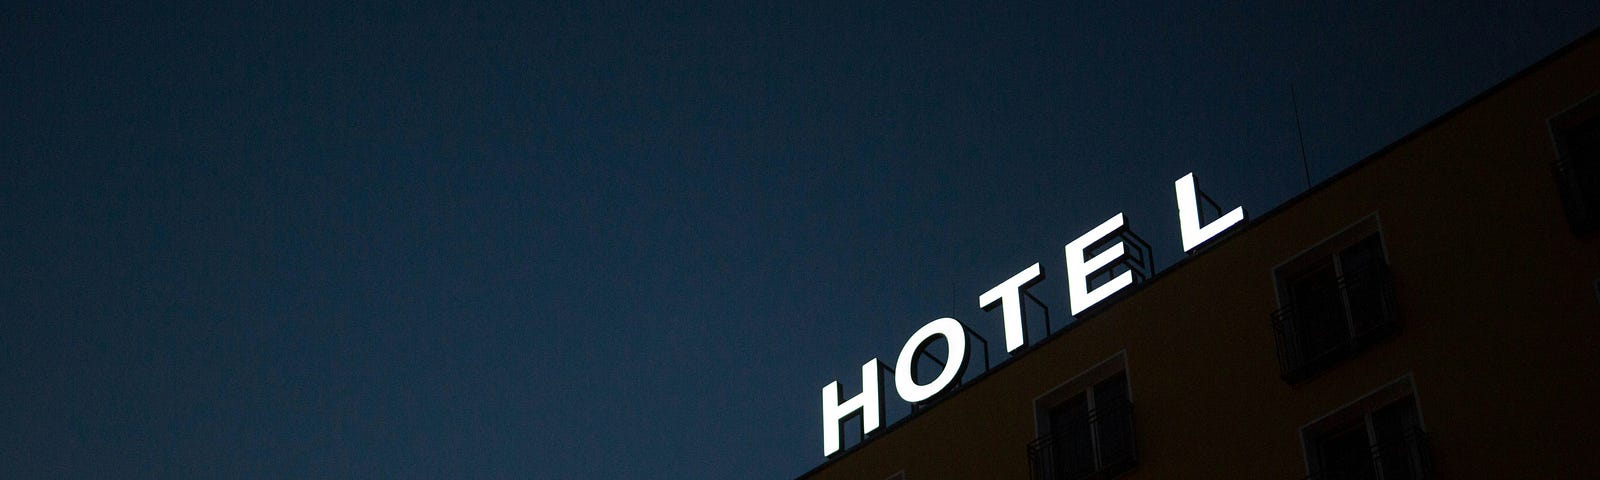 The word HOTEL on top of a building